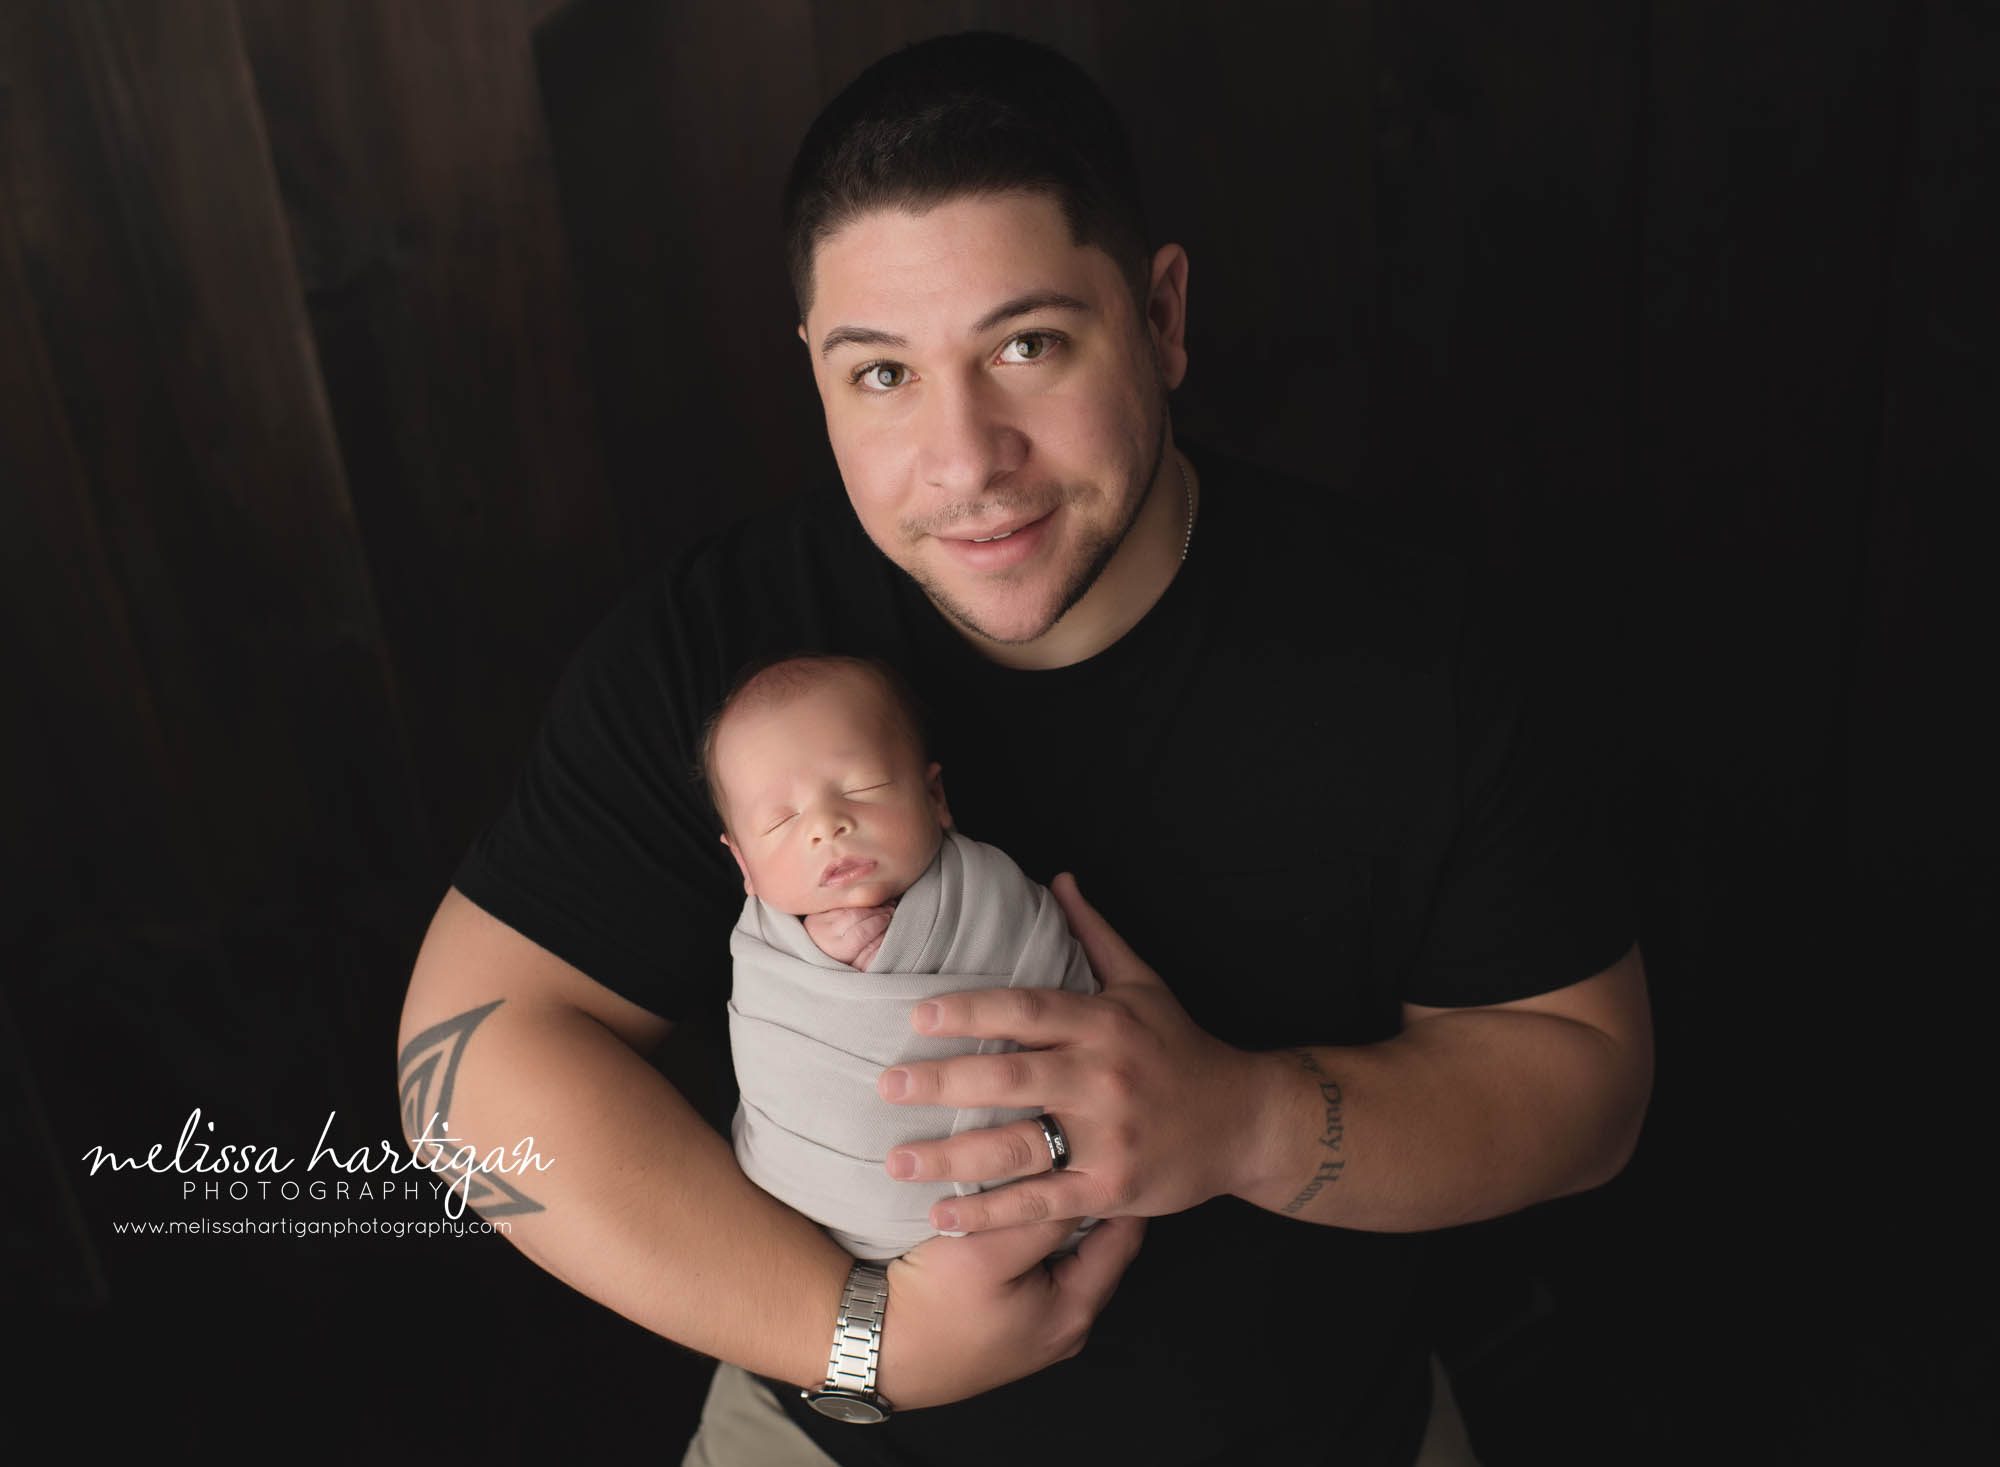 dad holding newborn son family pose newborn photography session in connecticut melissa hartigan photography